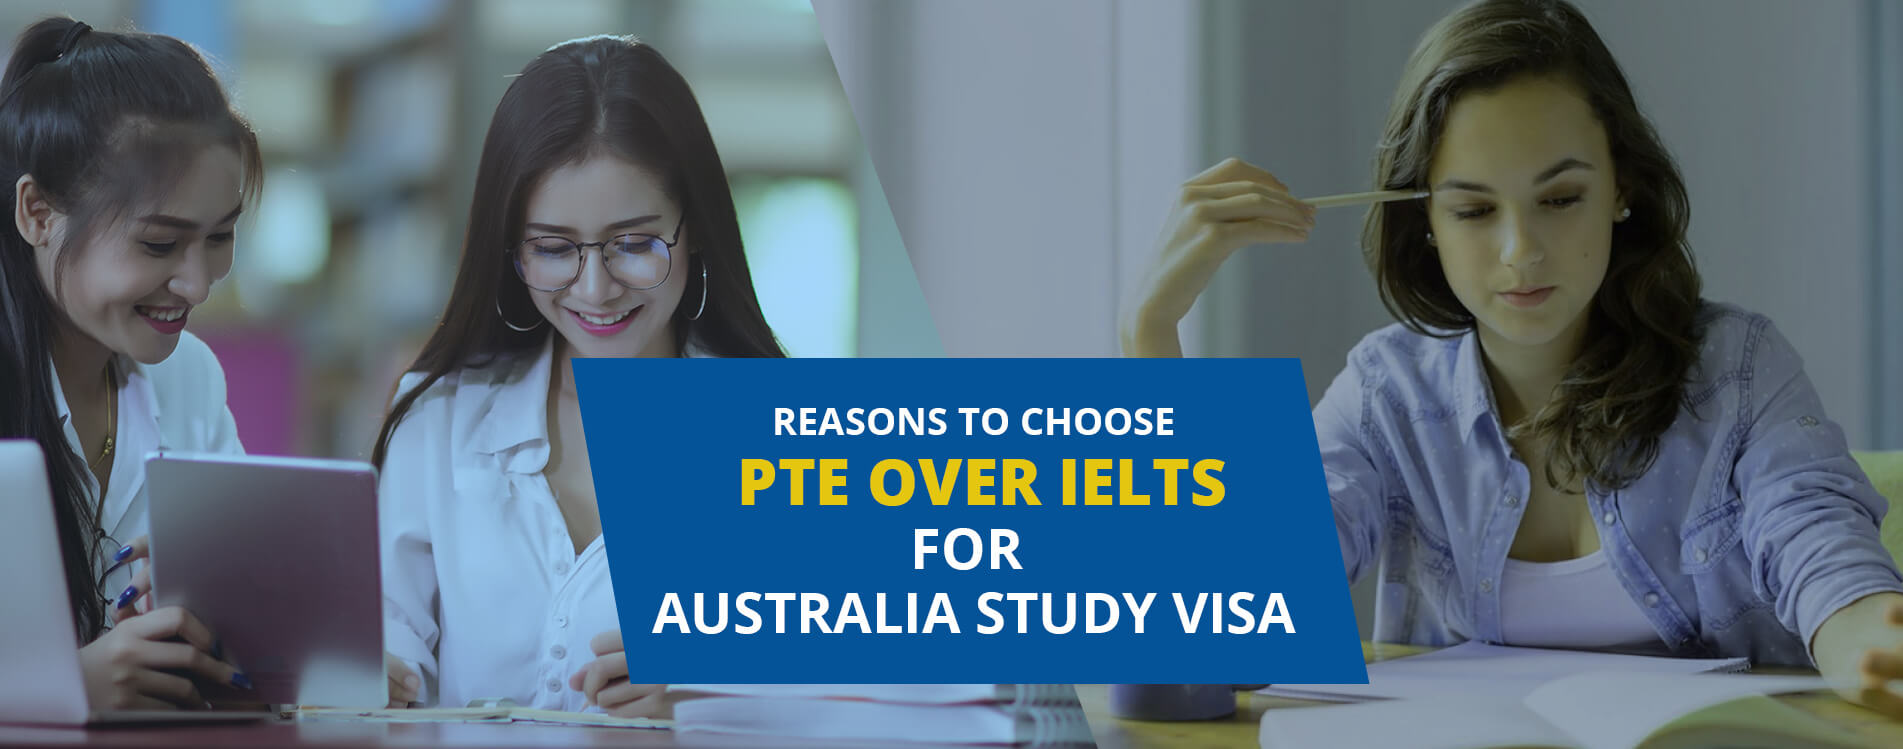 Reasons to Choose PTE Over IELTS for Australia Study Visa